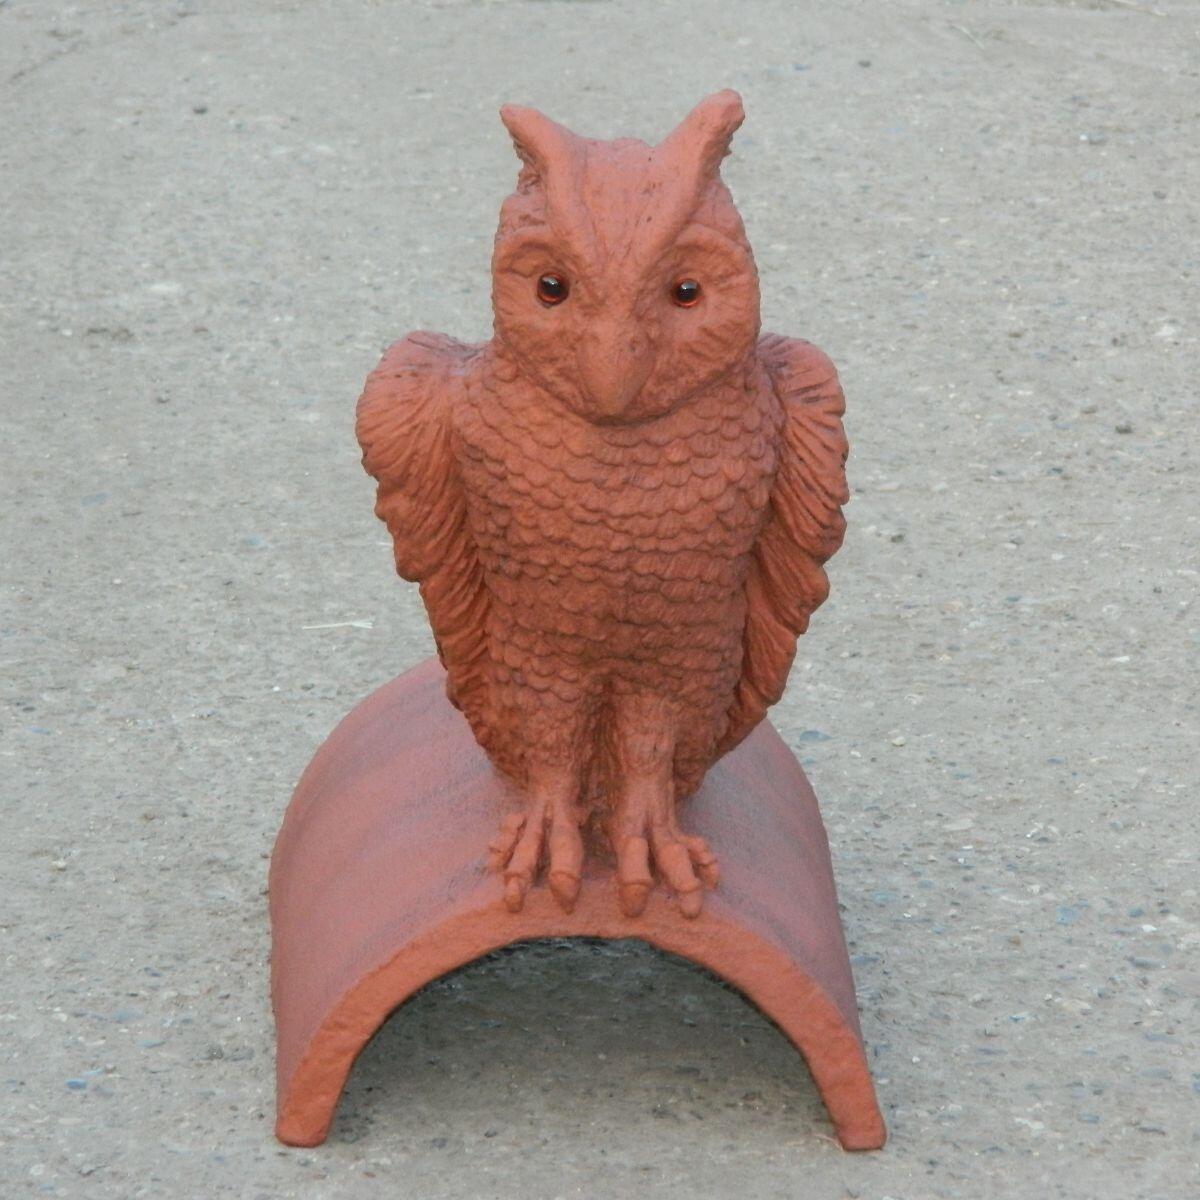 Owl half round ridge finial ornament with brown glass eyes